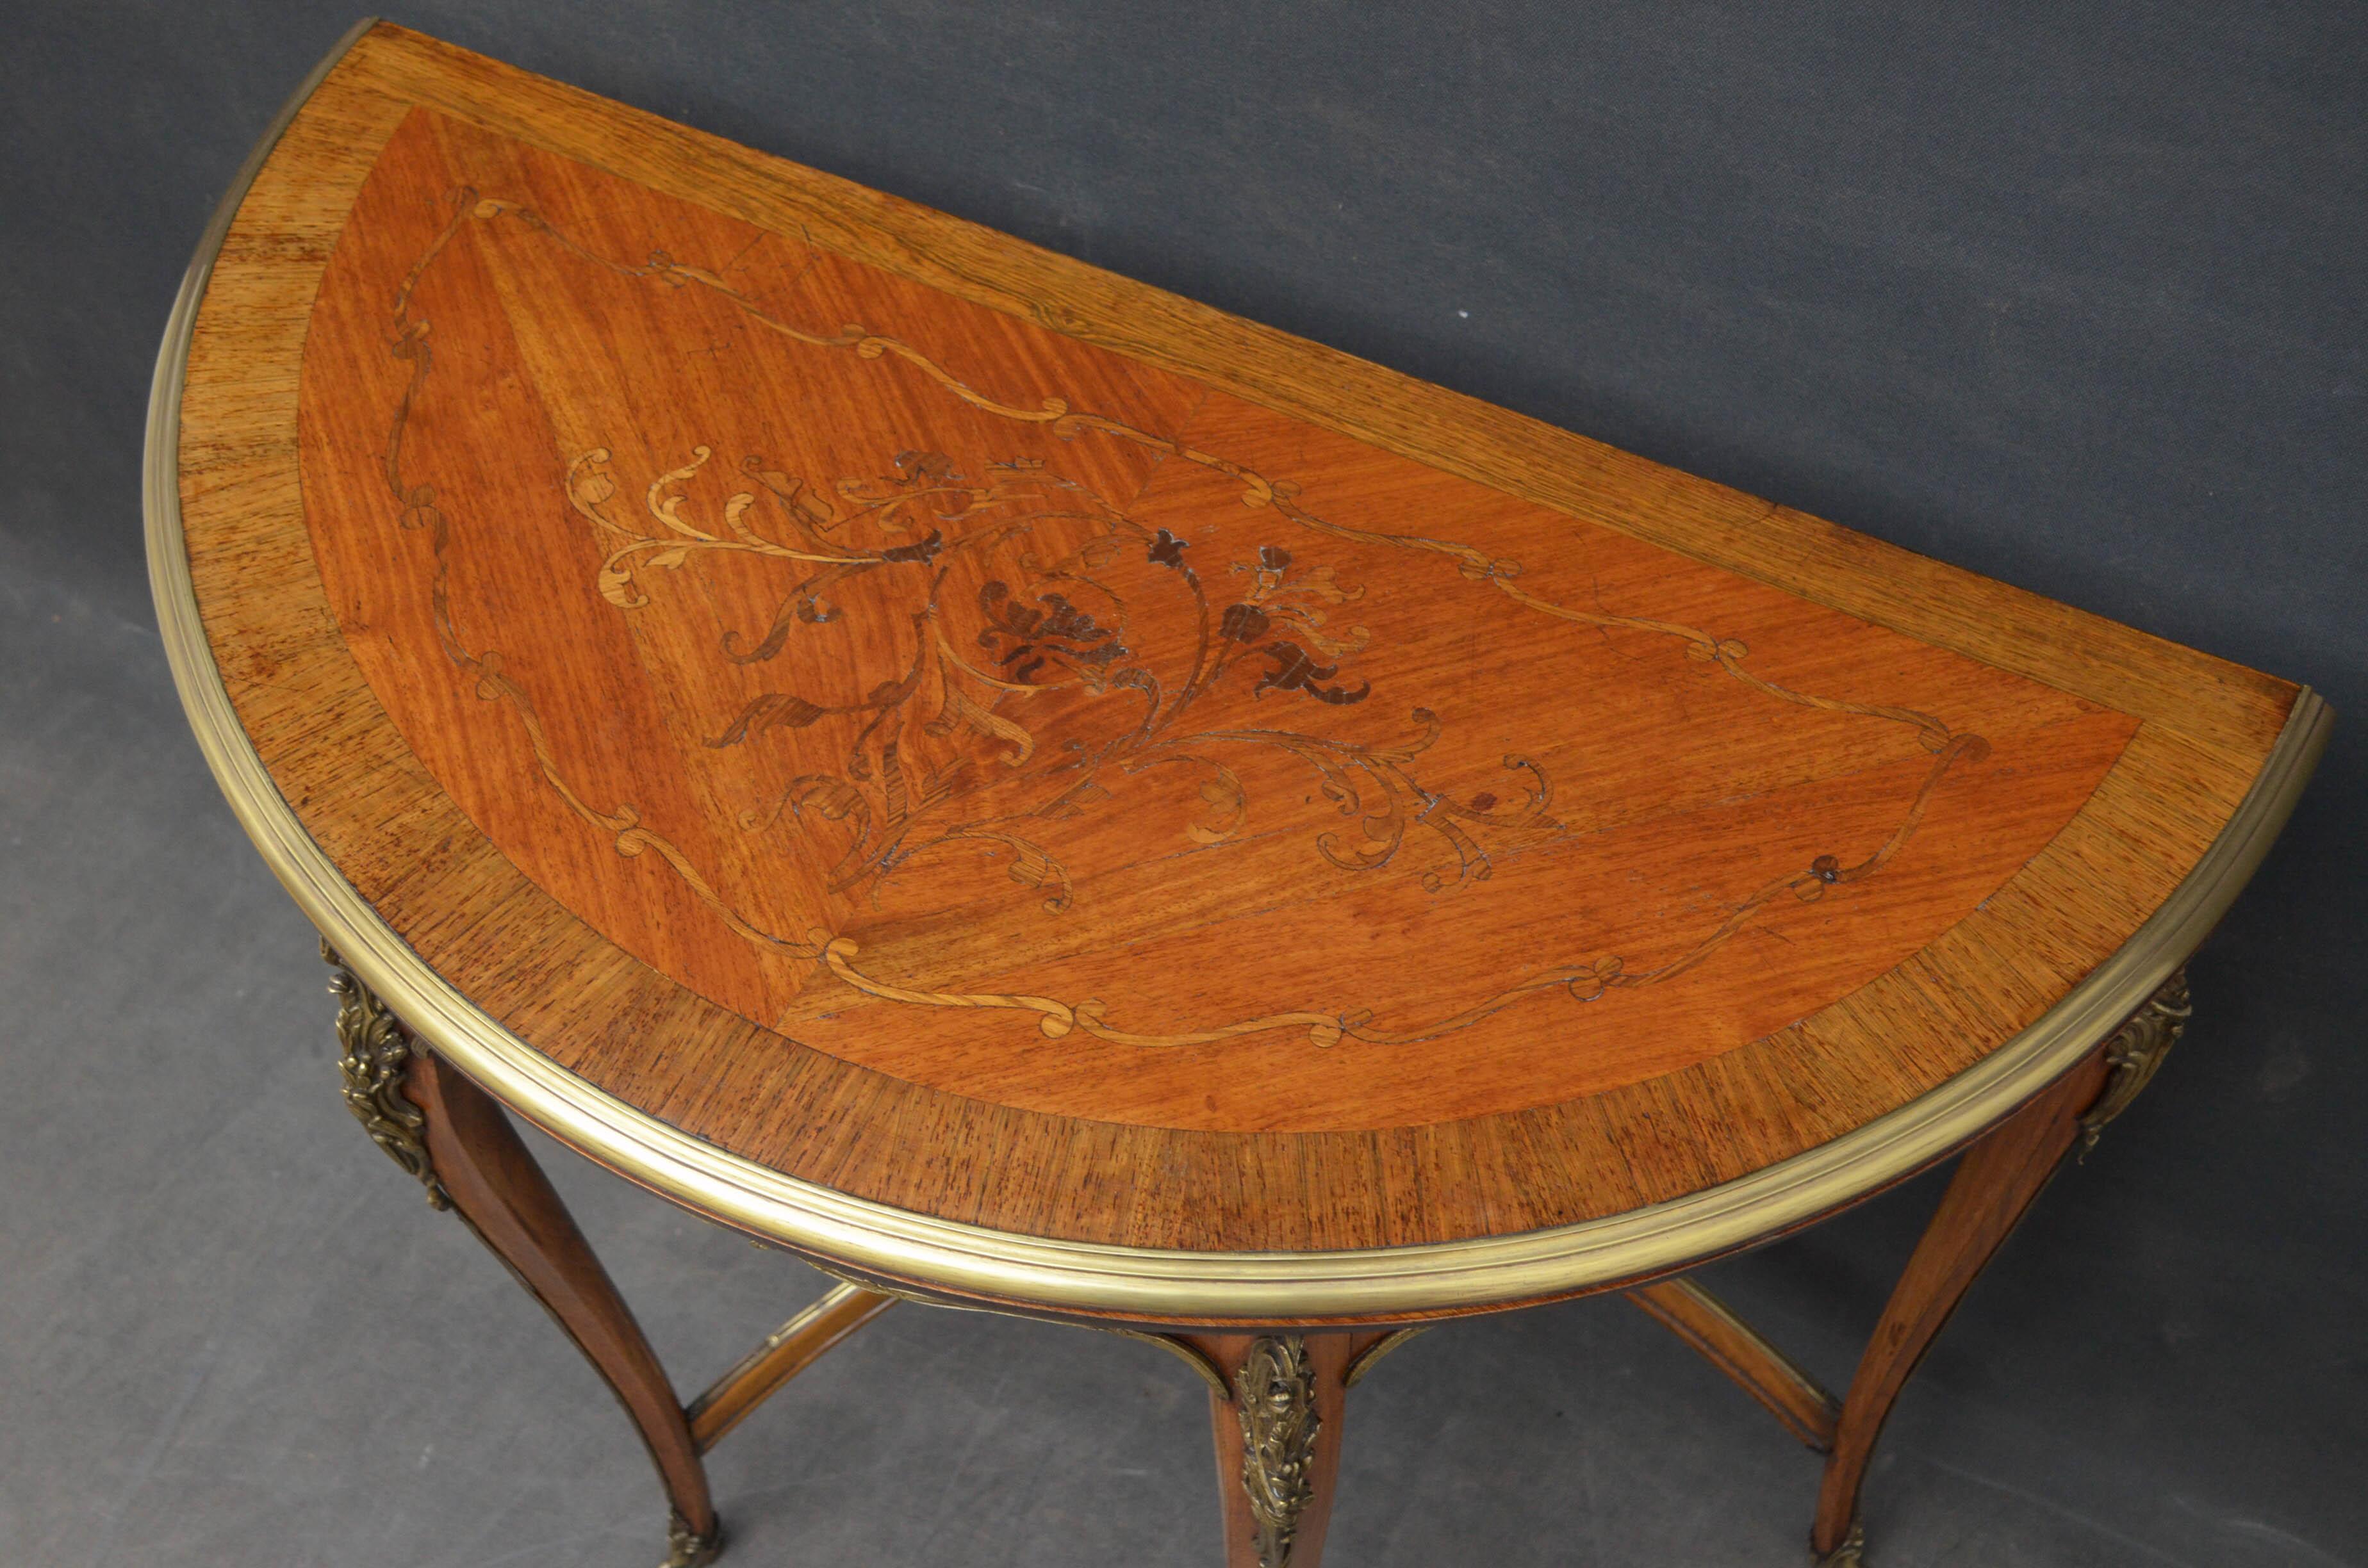 Sn4690 Attractive French demi lune card table, having finely inlaid top with brass edge, top opens to reveal maroon baize playing surface, inlaid frieze and 4 cabriole legs with ormolu decoration, all united by shaped stretcher. This antique card